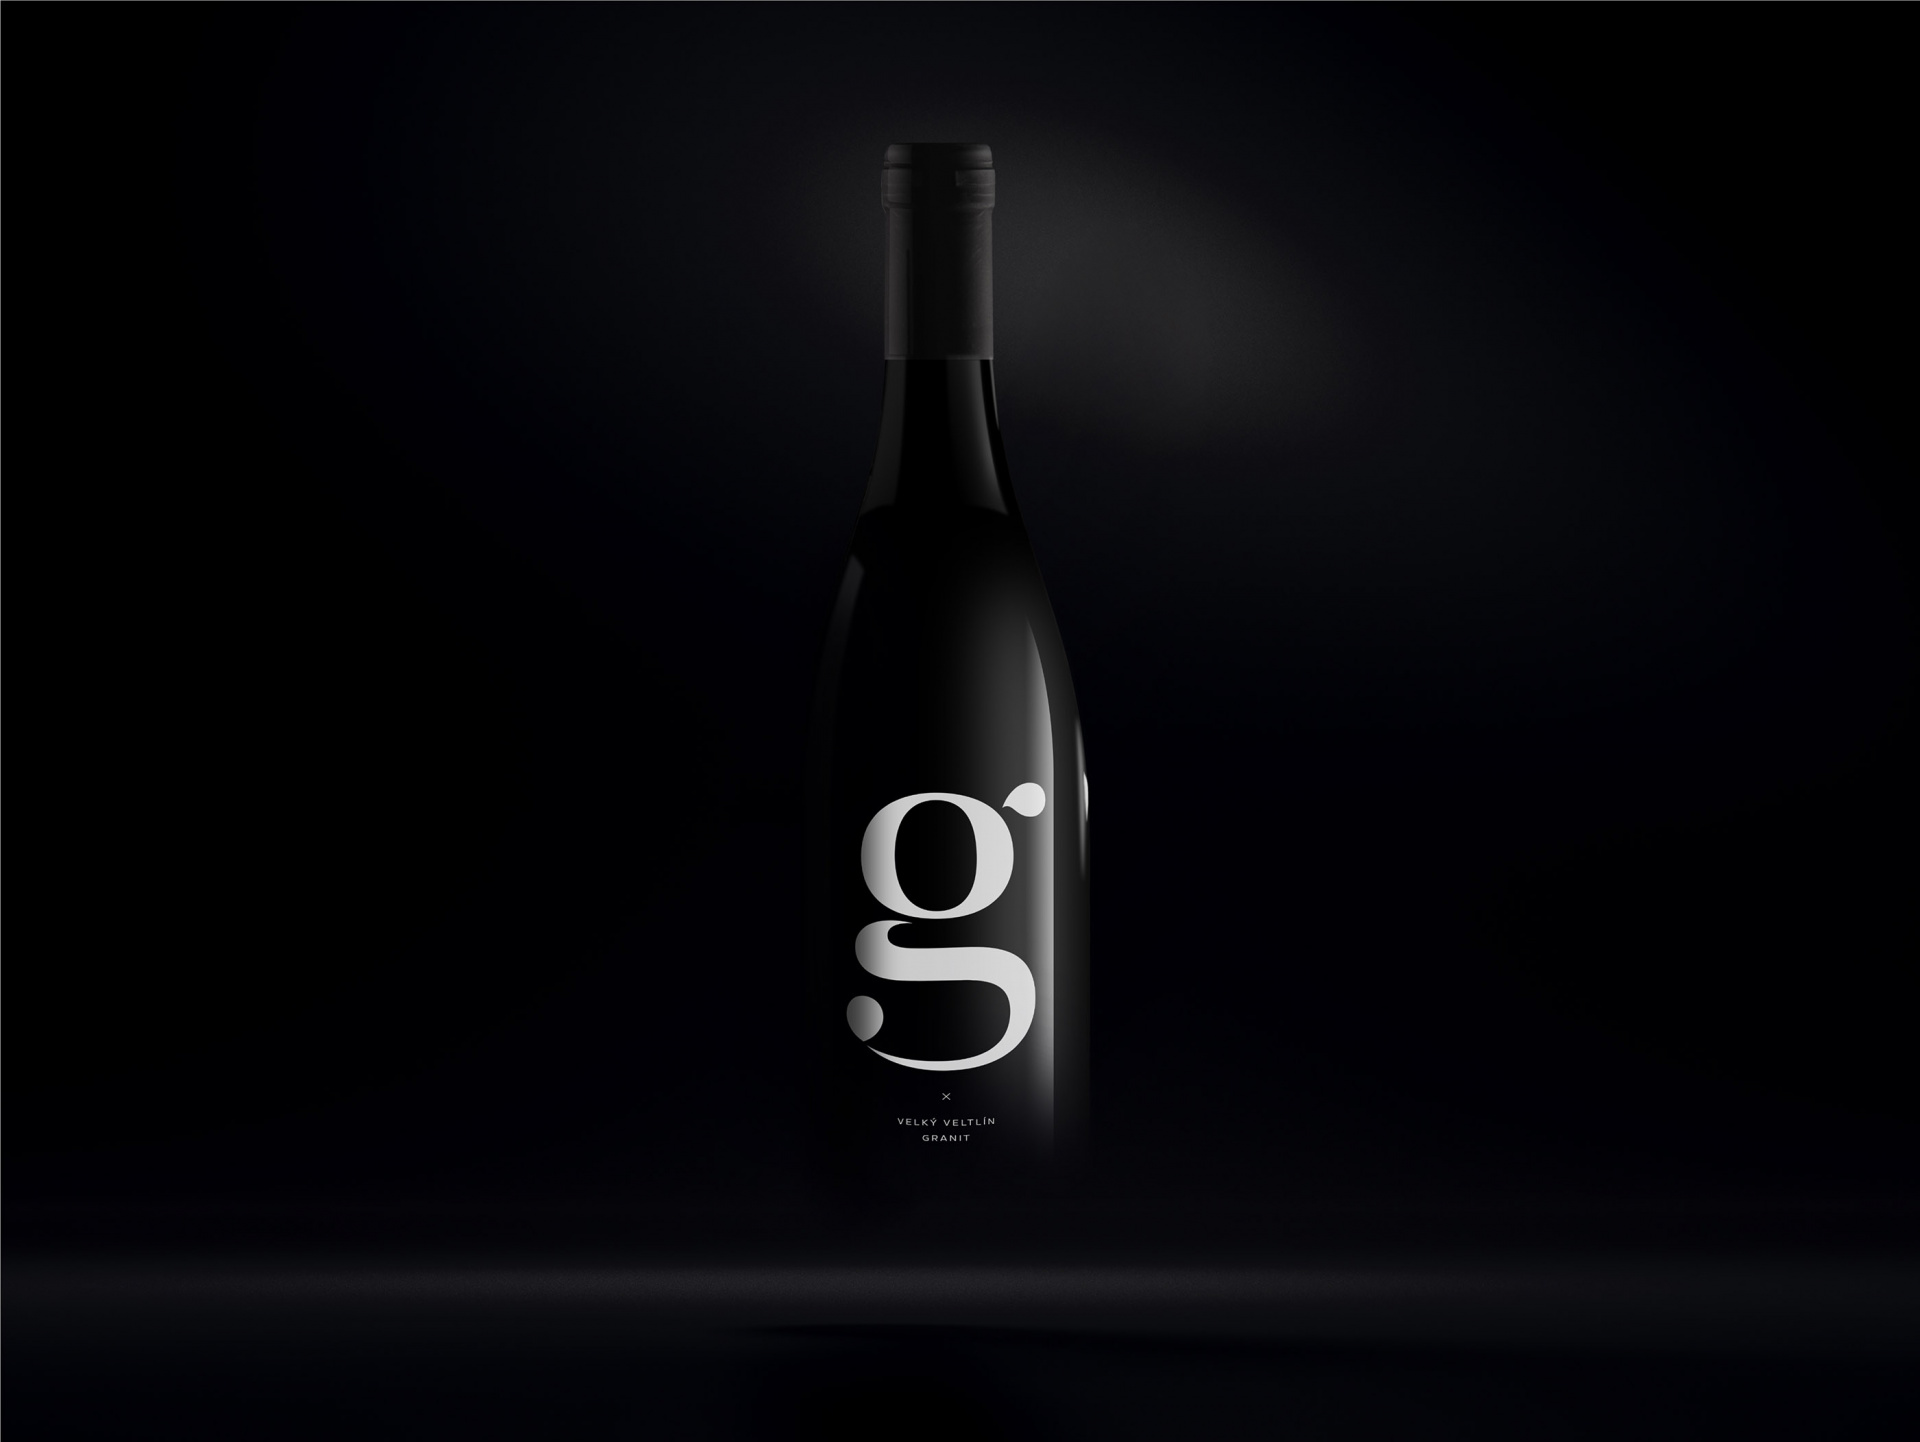 Vino Hort - Packaging design - Developed as a sales support tool for bankMoneta Money Bank, this app includes advisors at Moneta Money Bank, this app includes 5 calculators to simulate investment growth, encouraging them to invest rather than keep funds idle in accounts investment growth, encouraging them to invest rather than keep funds idle in accounts investment growth, encouraging them to invest rather than keep funds idle in accounts investment growth, encouraging them to invest rather than keep funds idle in accounts investment growth, encouraging them to invest rather than keep funds.